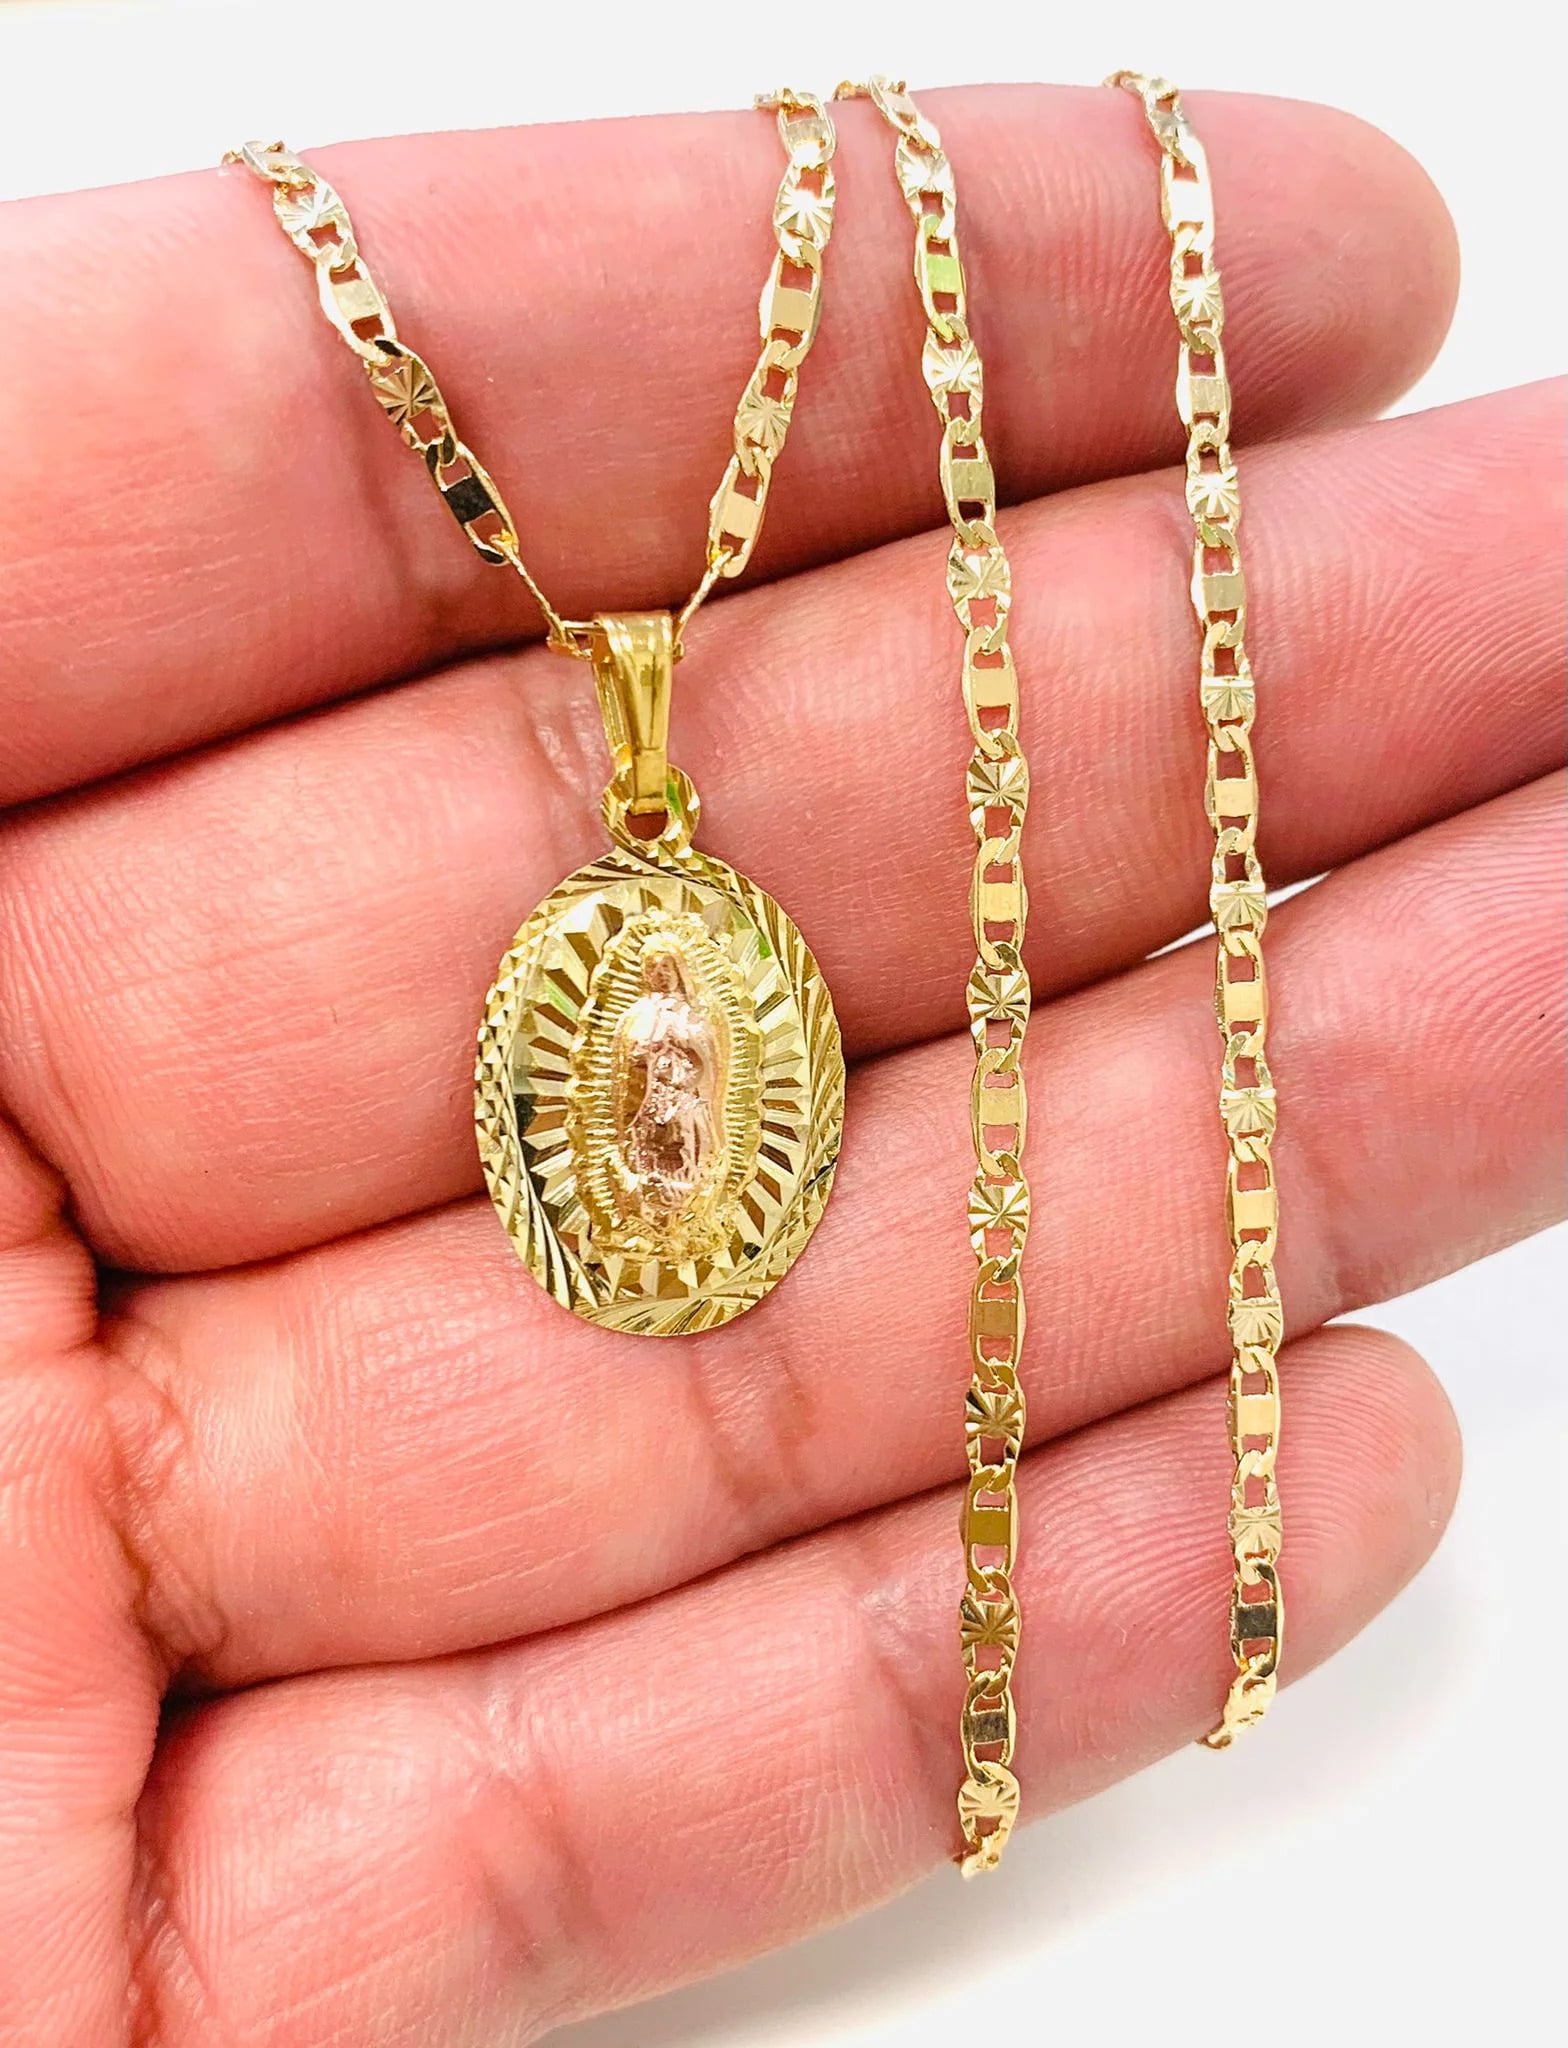 Our Lady Of Guadalupe Medal | Vansweden Jewelers